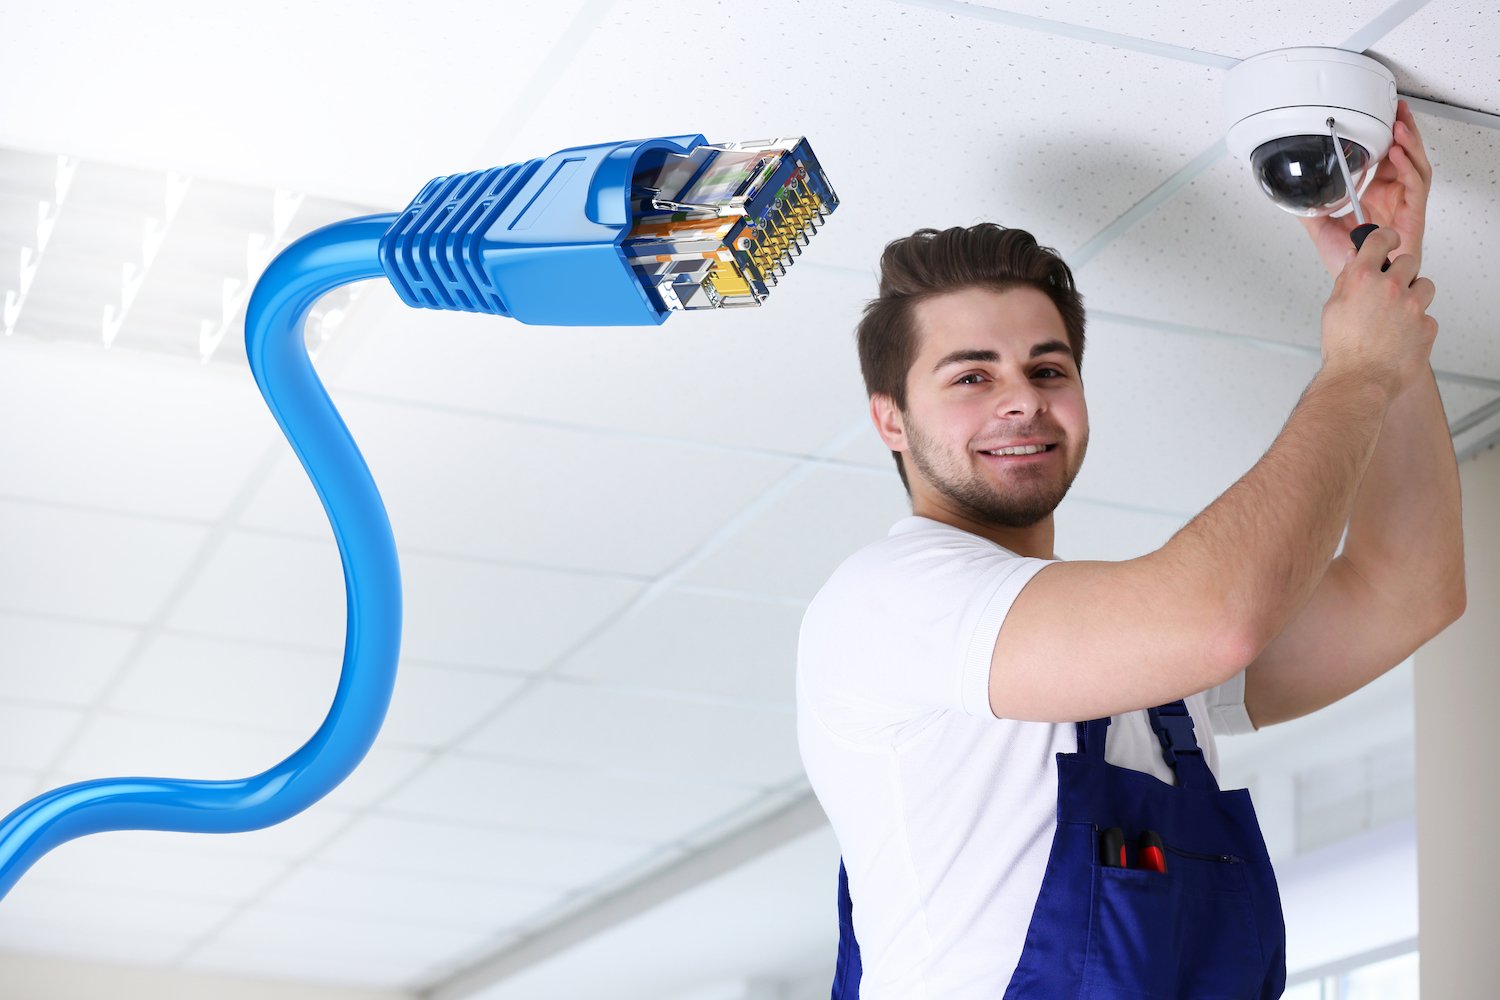 A workman in overalls installs an overhead camera on a white ceiling. Shown in the foreground is a blue Ethernet cable.